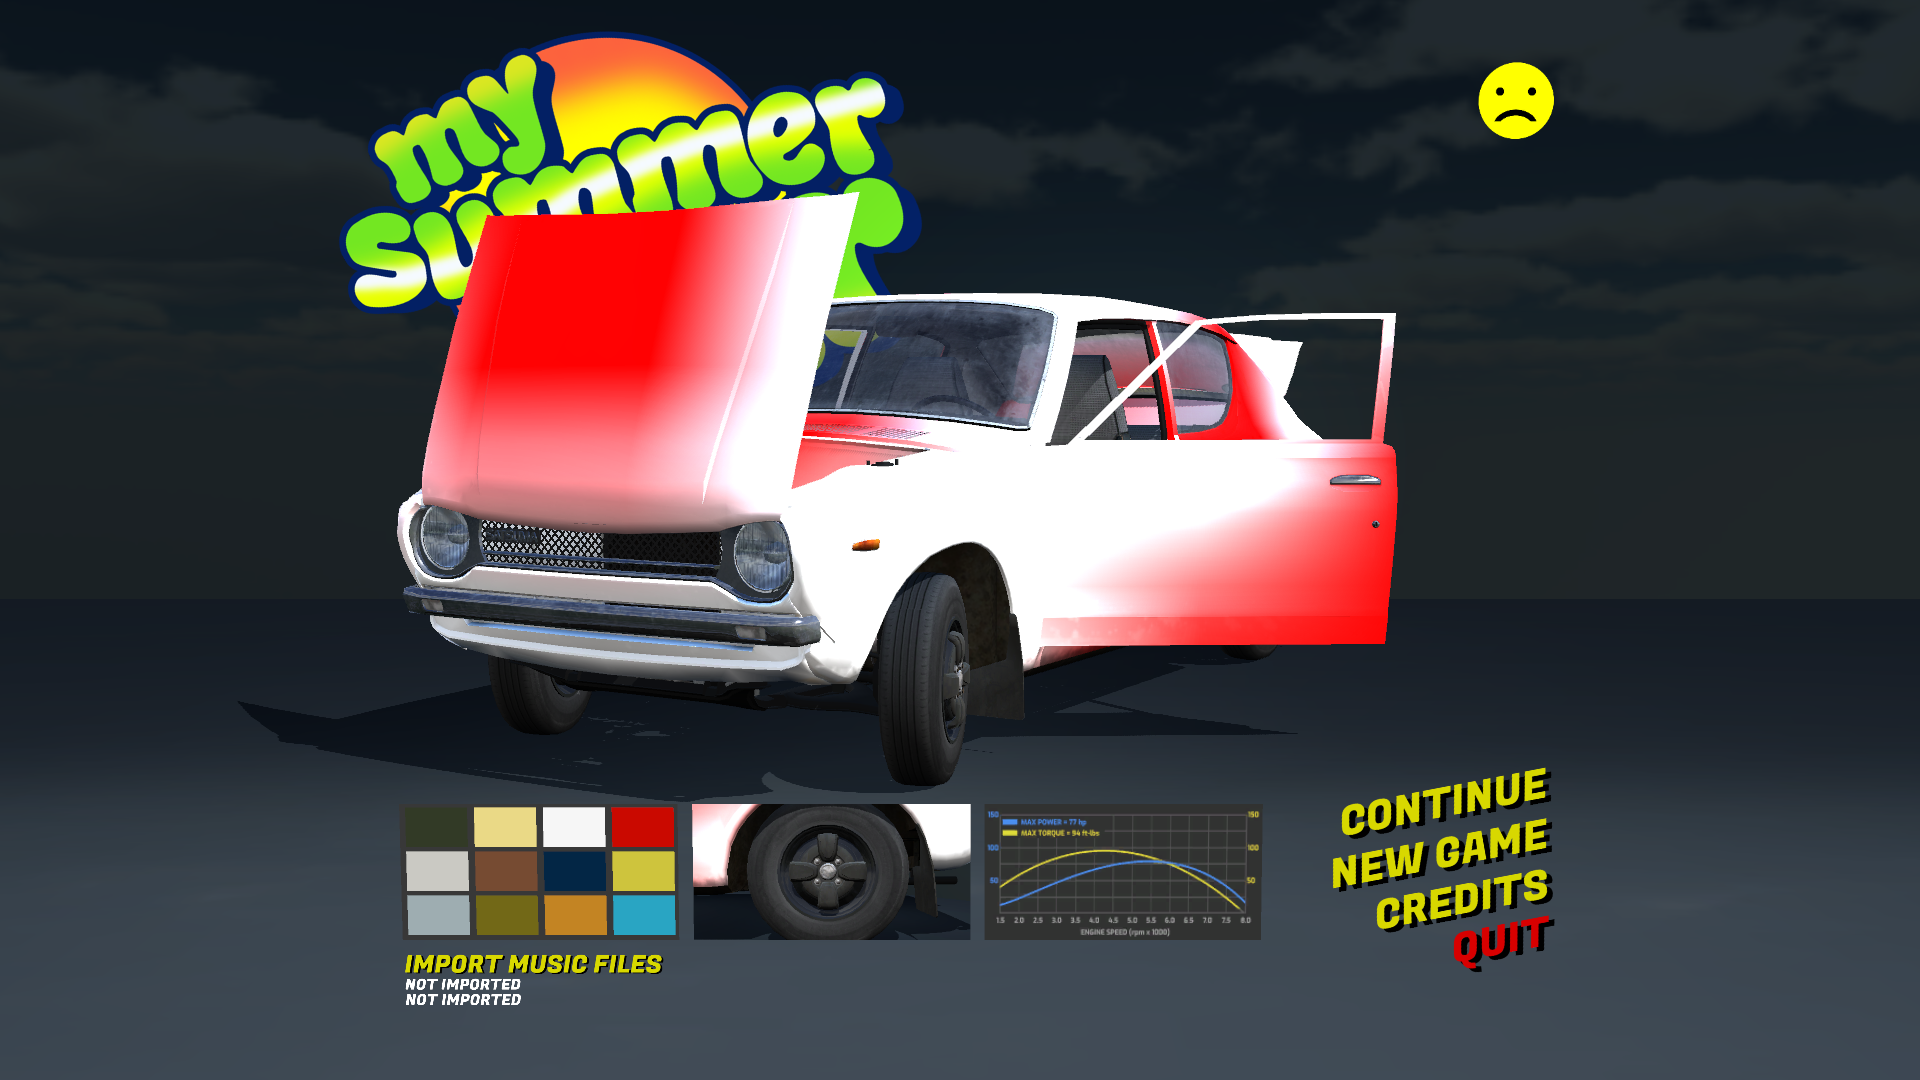 Sorry for no game audio, coming in part 2 tho #msc #mysummercar